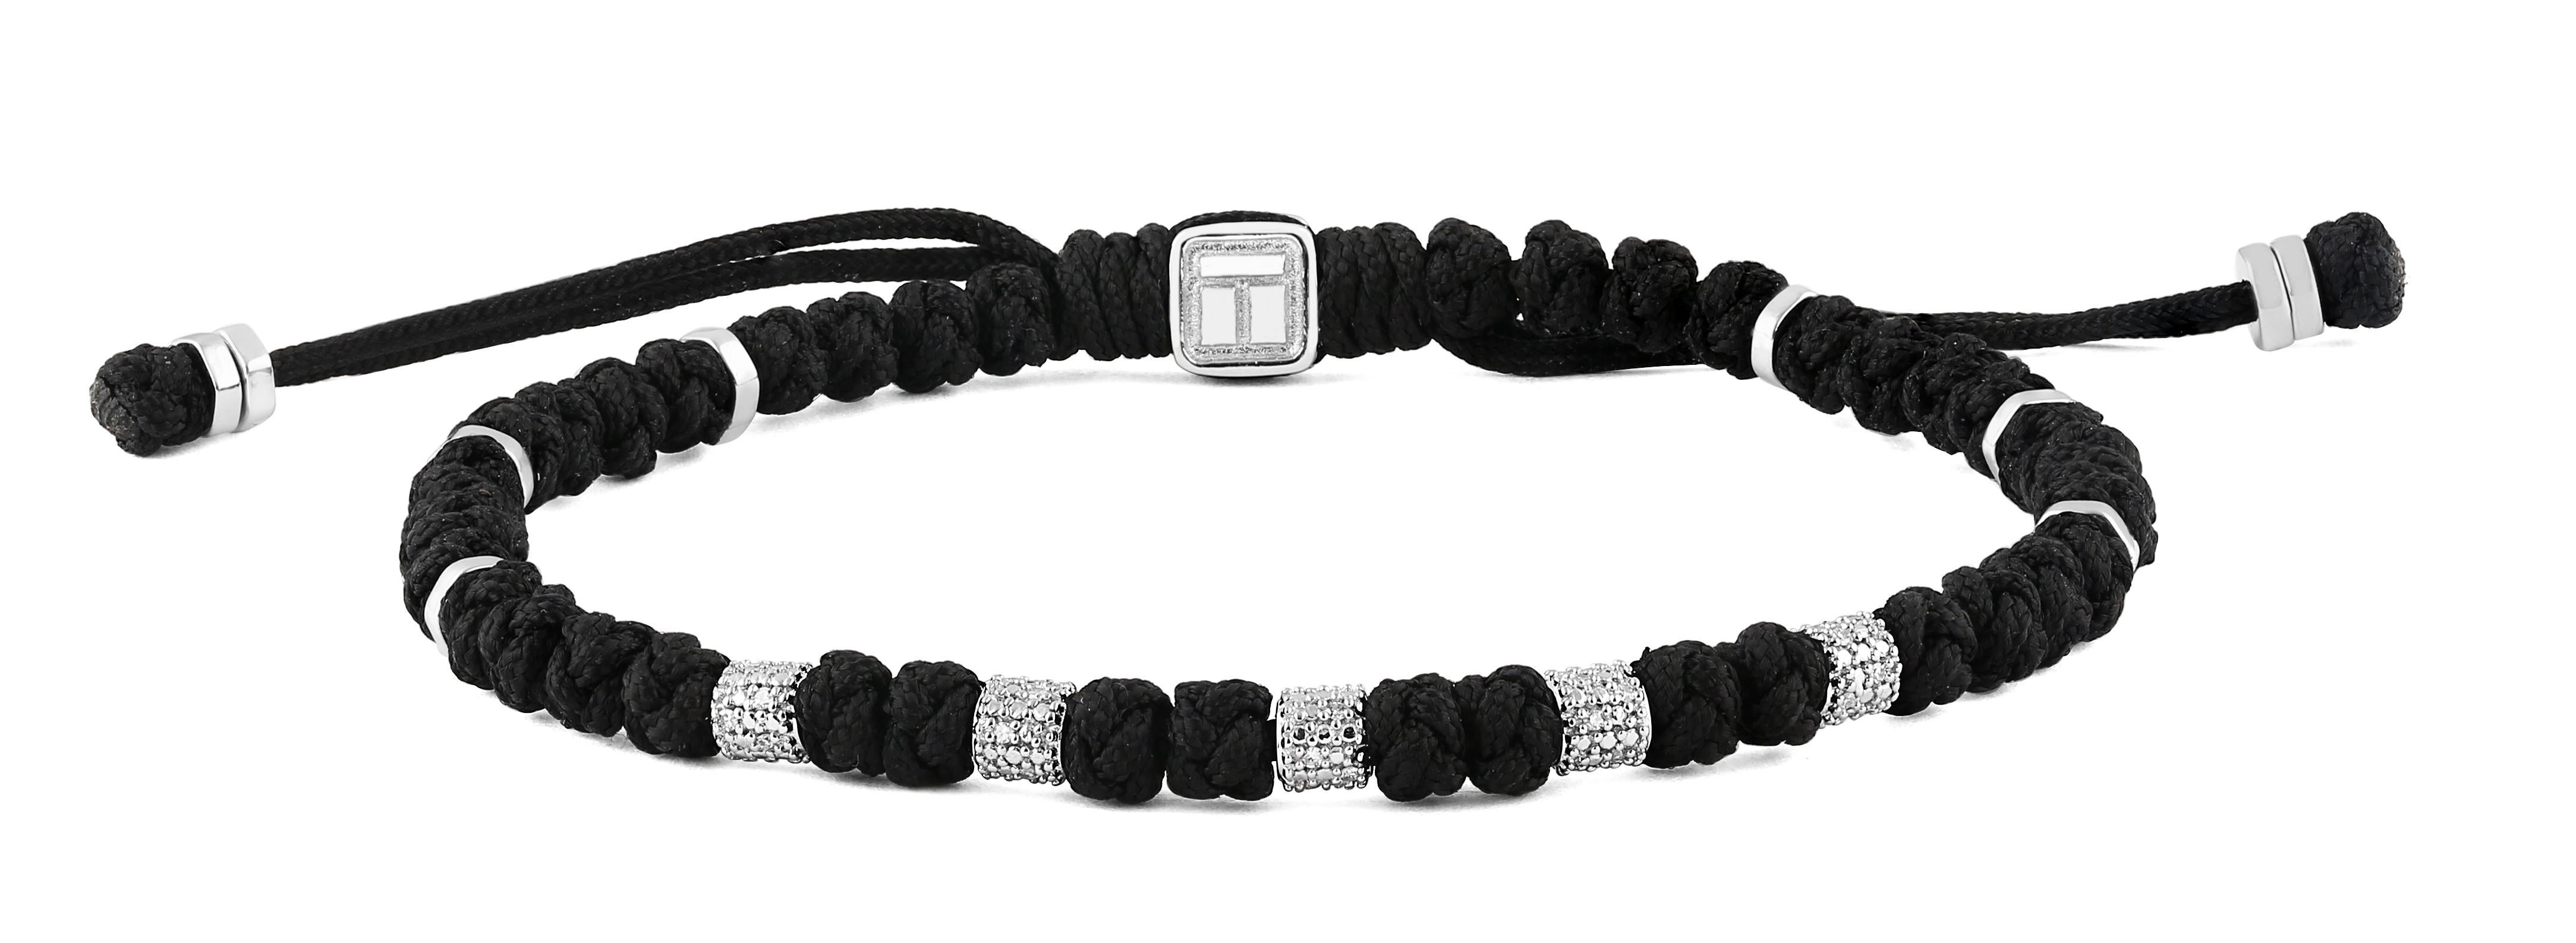 This macramé bracelets uses Chinese knots intricately woven from one single thread to create ‘bead-like’ knots, spaced out by white diamond pave beads forming a front statement feature. This bracelet takes over two hours to meticulously hand braid